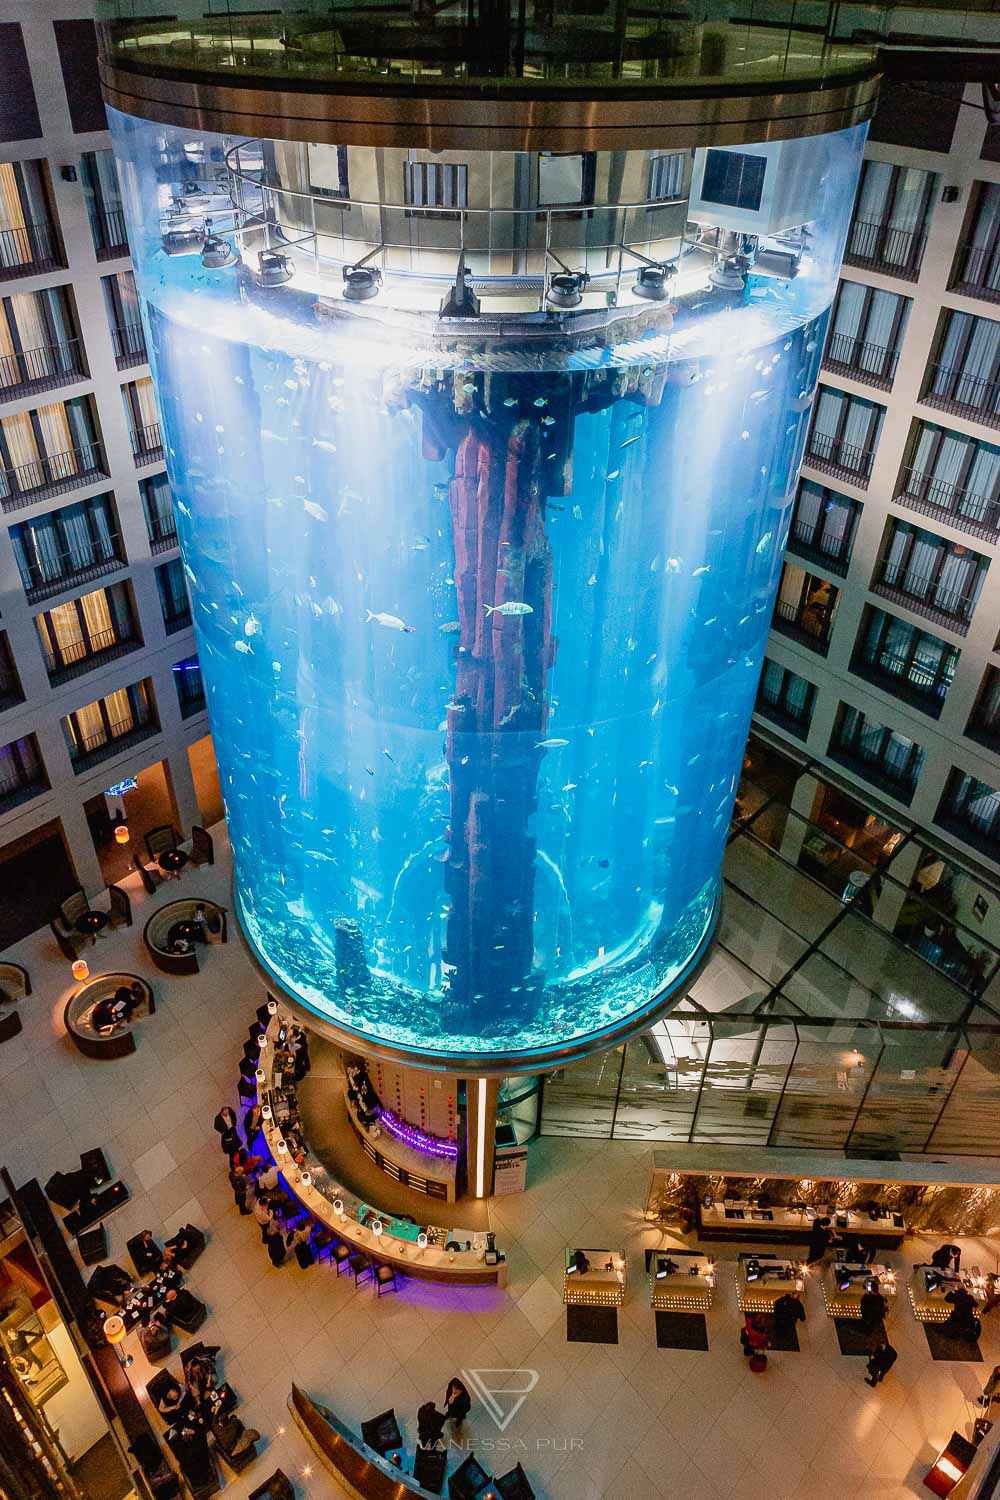 Aquadom Berlin - Huge aquarium with elevator in the hotel - Getting married in aquarium elevator - a special wedding location - 1500 fishes as witnesses of marriage